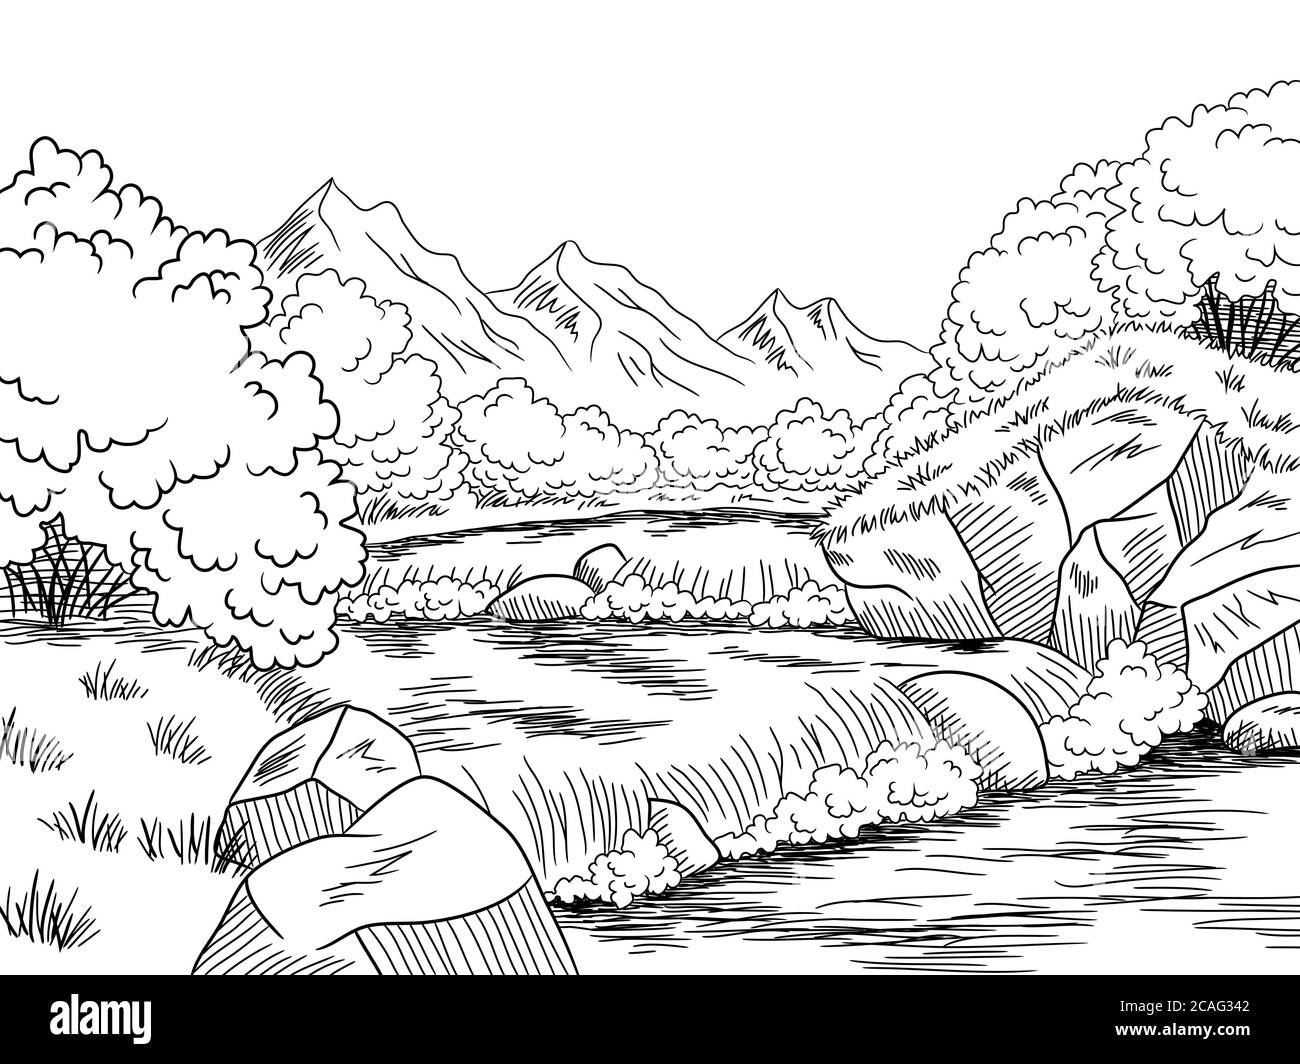 Scenery drawing Black and White Stock Photos & Images - Alamy